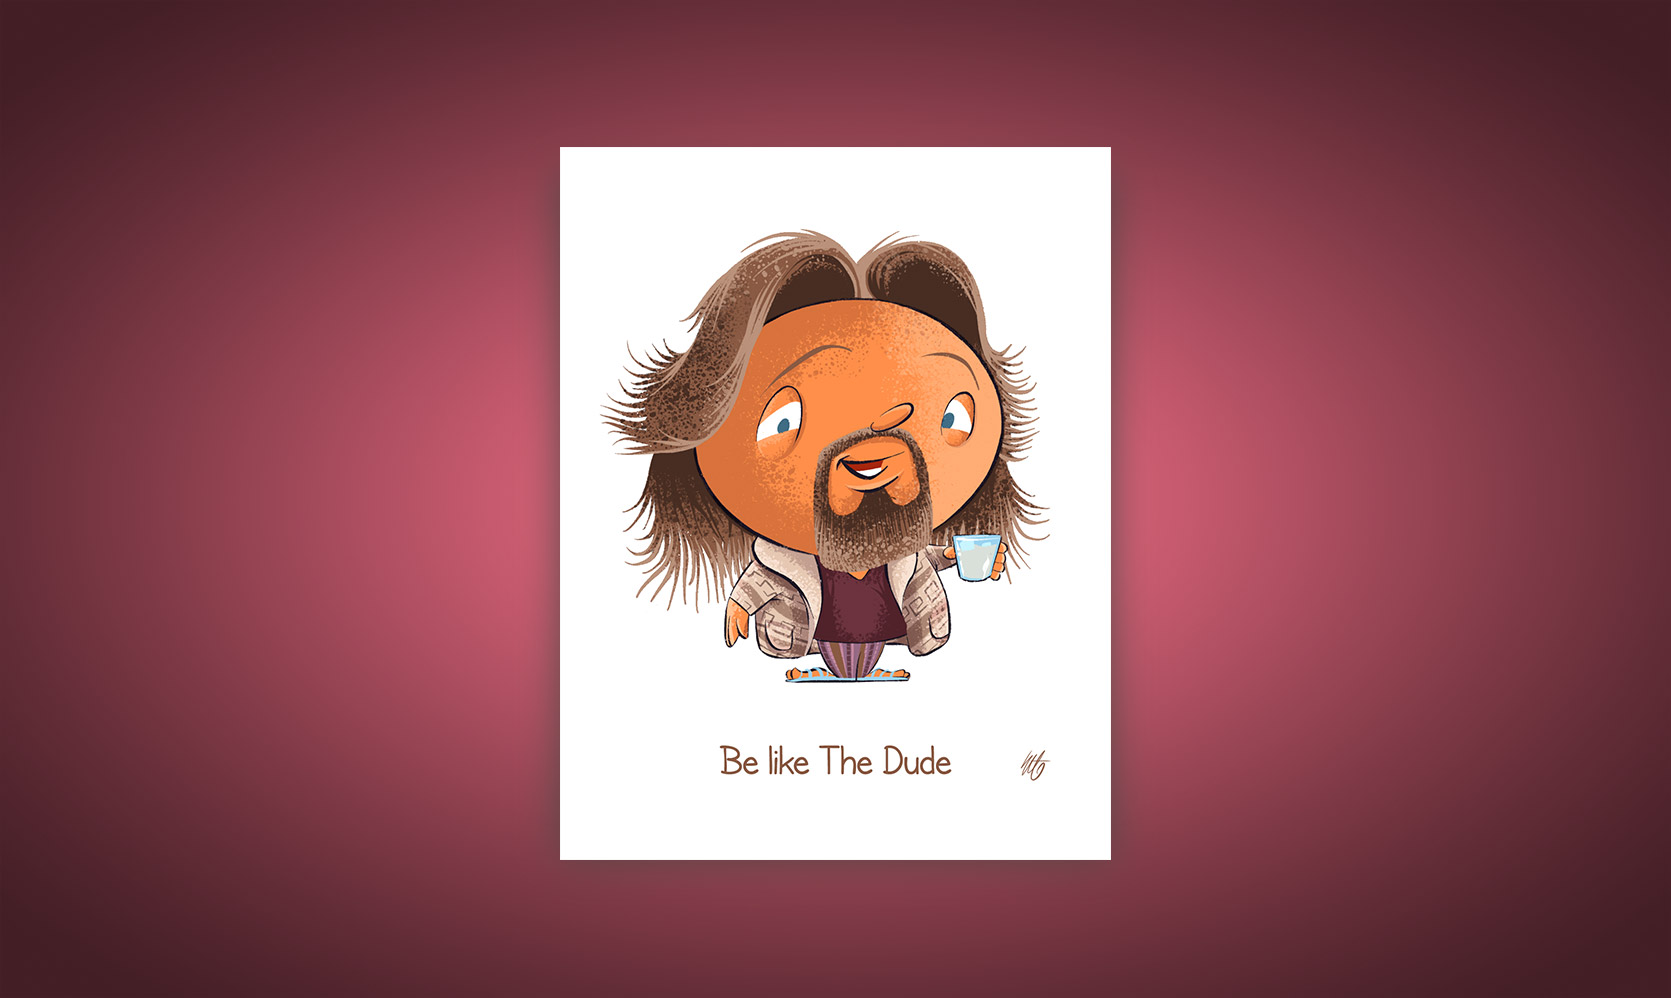 Be Like The Dude - Greeting card available on Etsy.